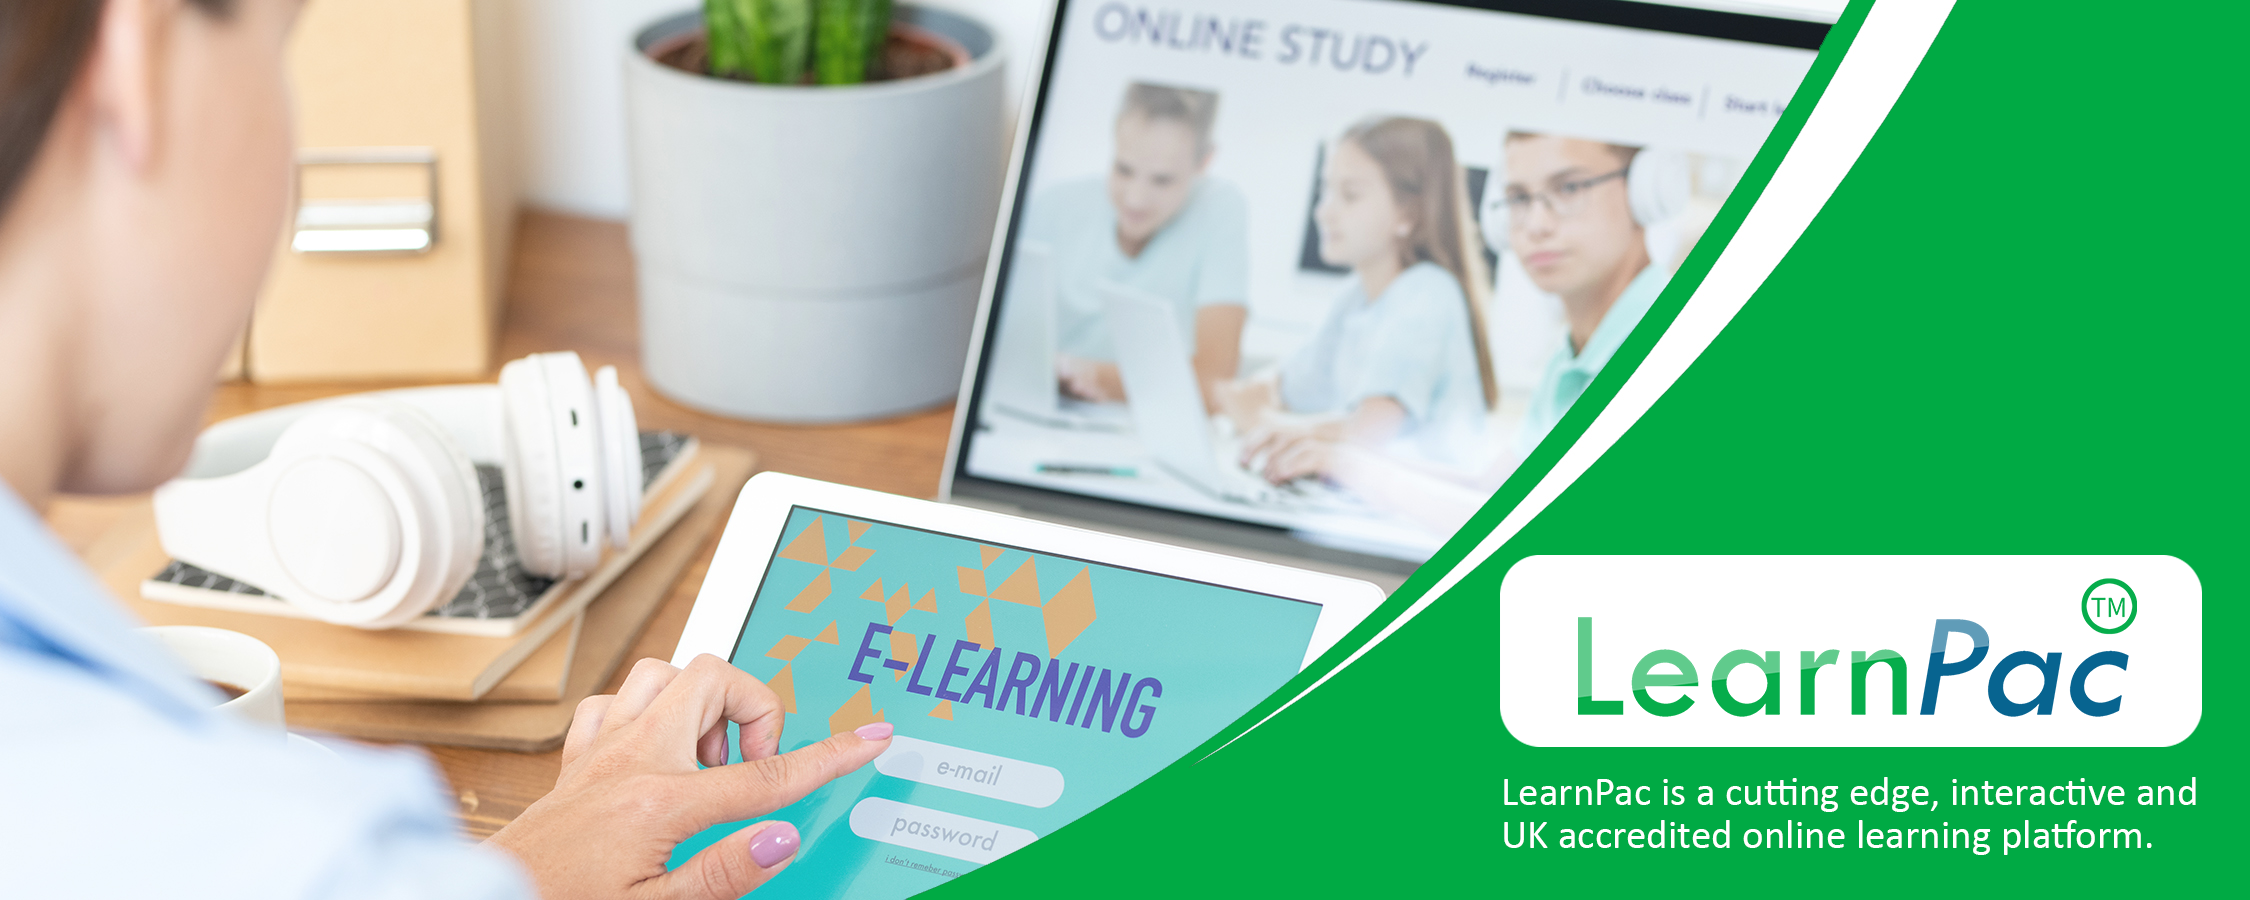 Professional Chaperone - Level 2 - E-Learning Course - LearnPac Systems UK -